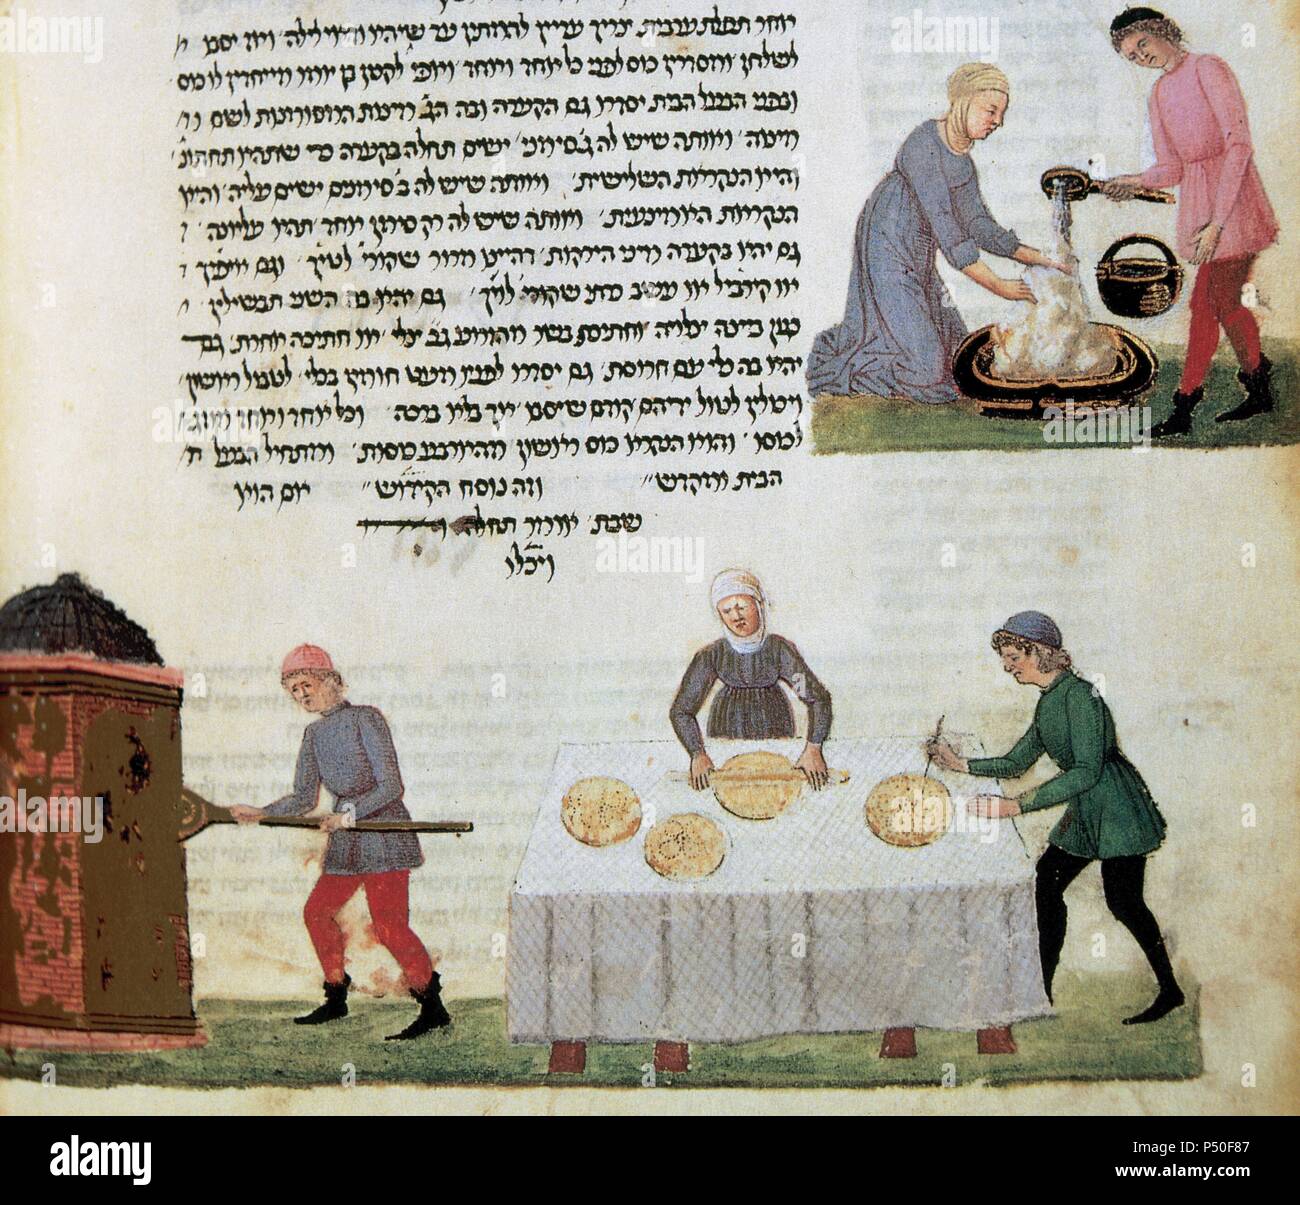 Rothschild Miscelany. Manuscript dated in1640. Page of facsimile published in London, written in Hebrew and illustrated, depicting the preparation of matzo unleavened bread for the feast of the Jewish Passover. CSIC. Madrid. Spain. Stock Photo